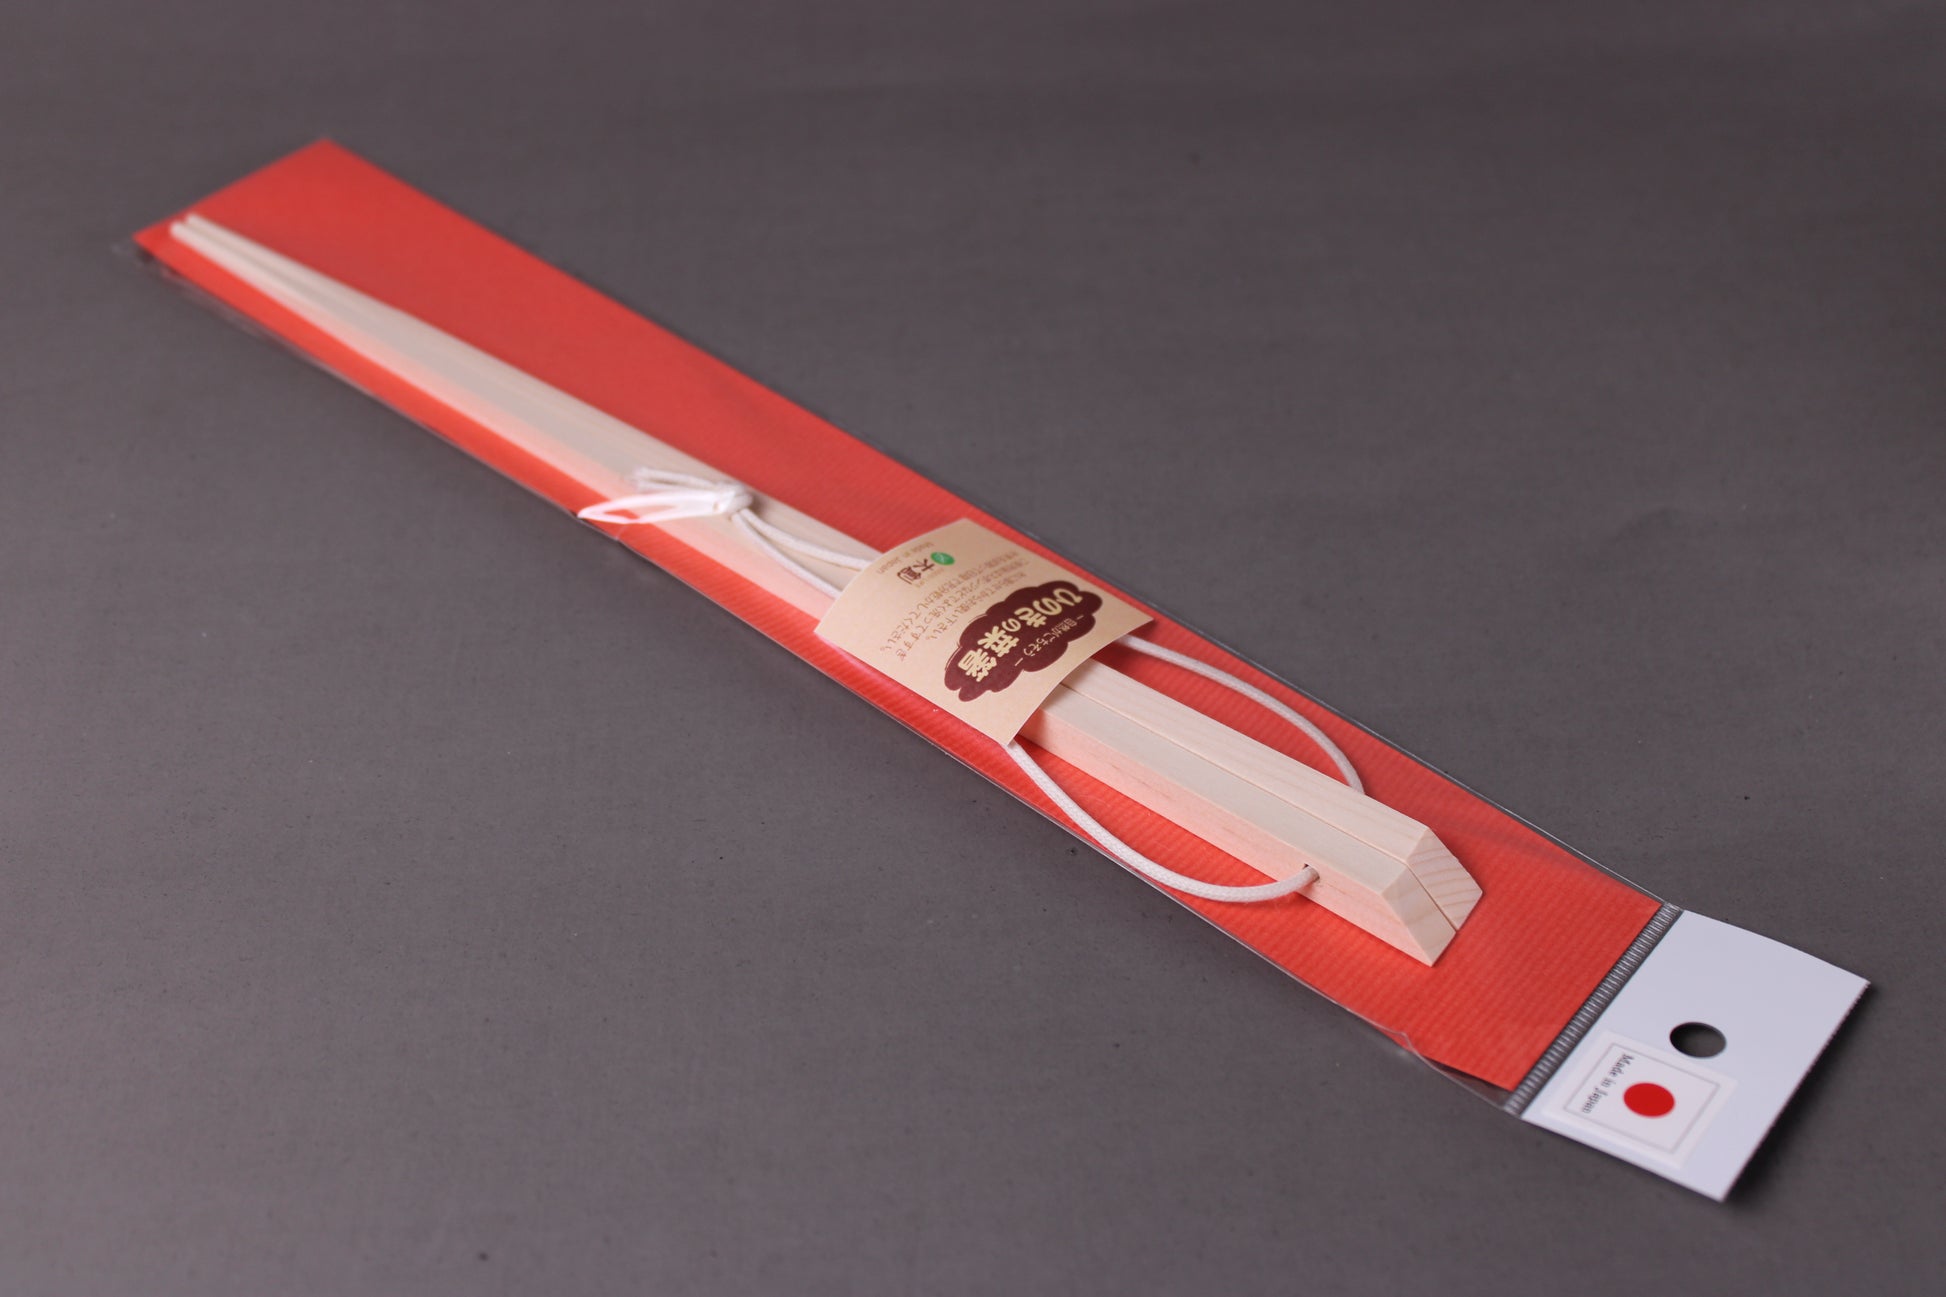  saibashi square cooking chopsticks by yamacoh youbi kisou life packed in clear plastic with red paper backing and sticker writing hinoki in hiragana with grey background closeup of package